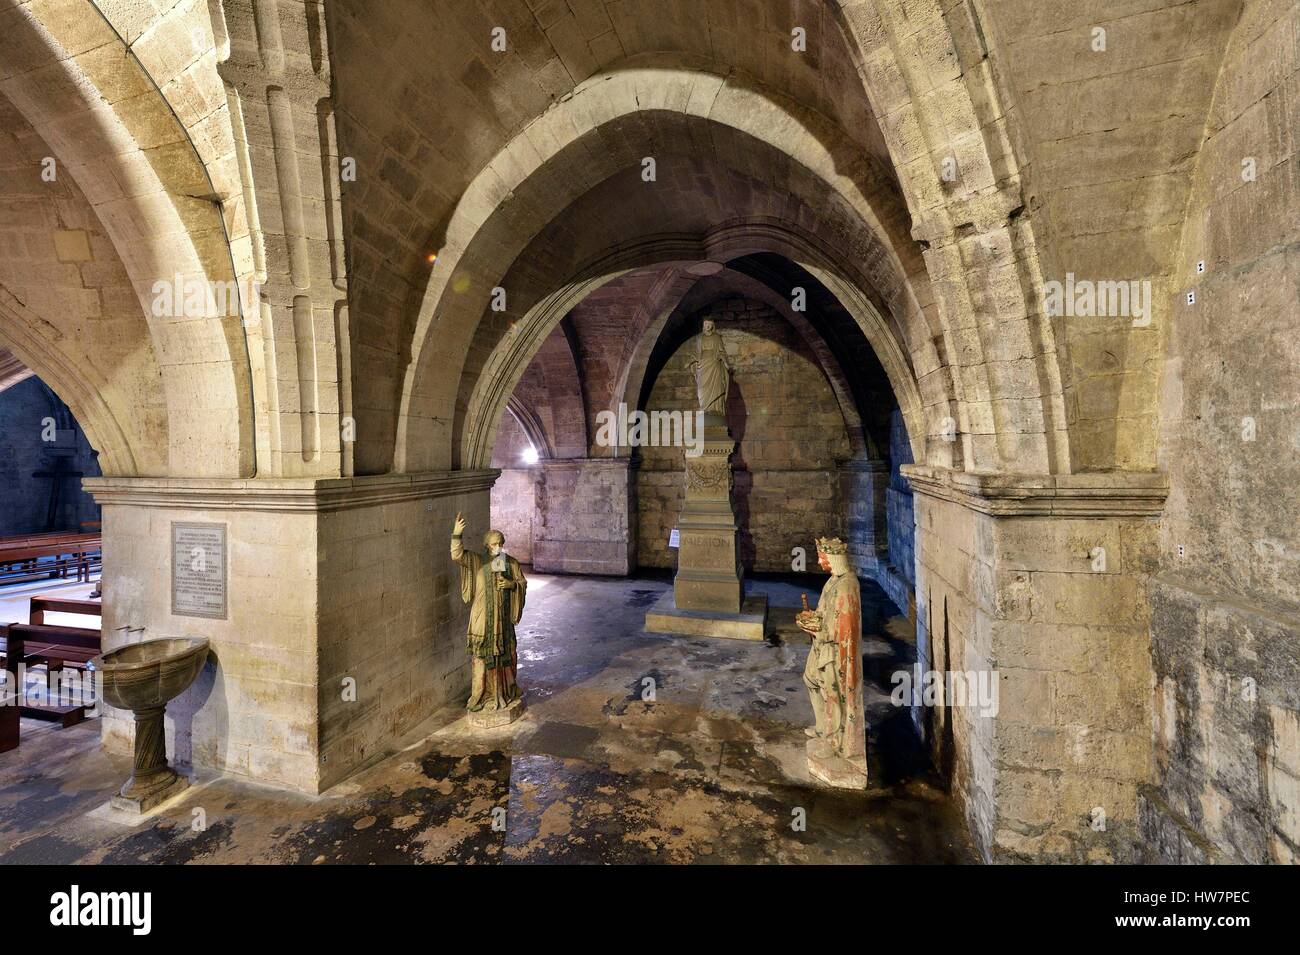 France Gard Saint Gilles 12th-13th century abbey listed as World Heritage by UNESCO under the road to St Jacques de Compostela Stock Photo